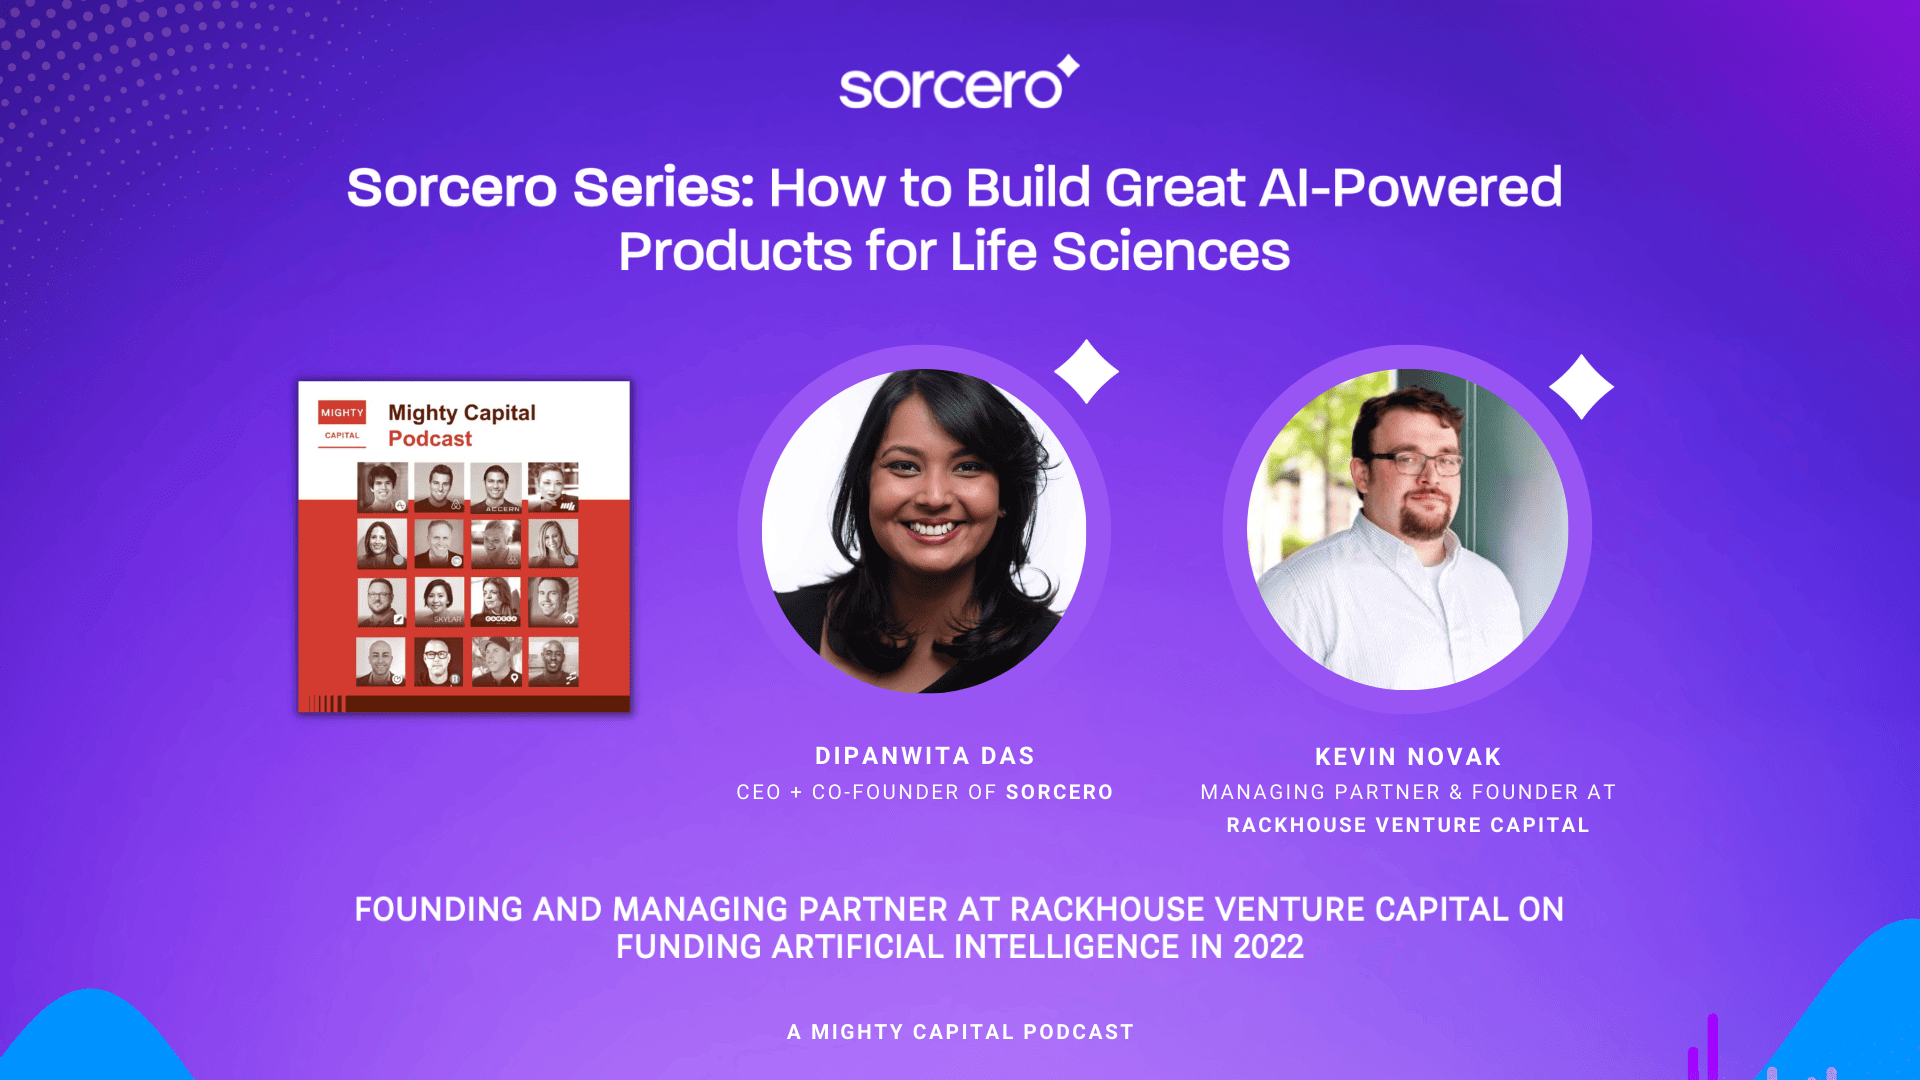 Sorcero Podcast Series: Rackhouse VC Founding and Managing Partner on Funding AI in 2022